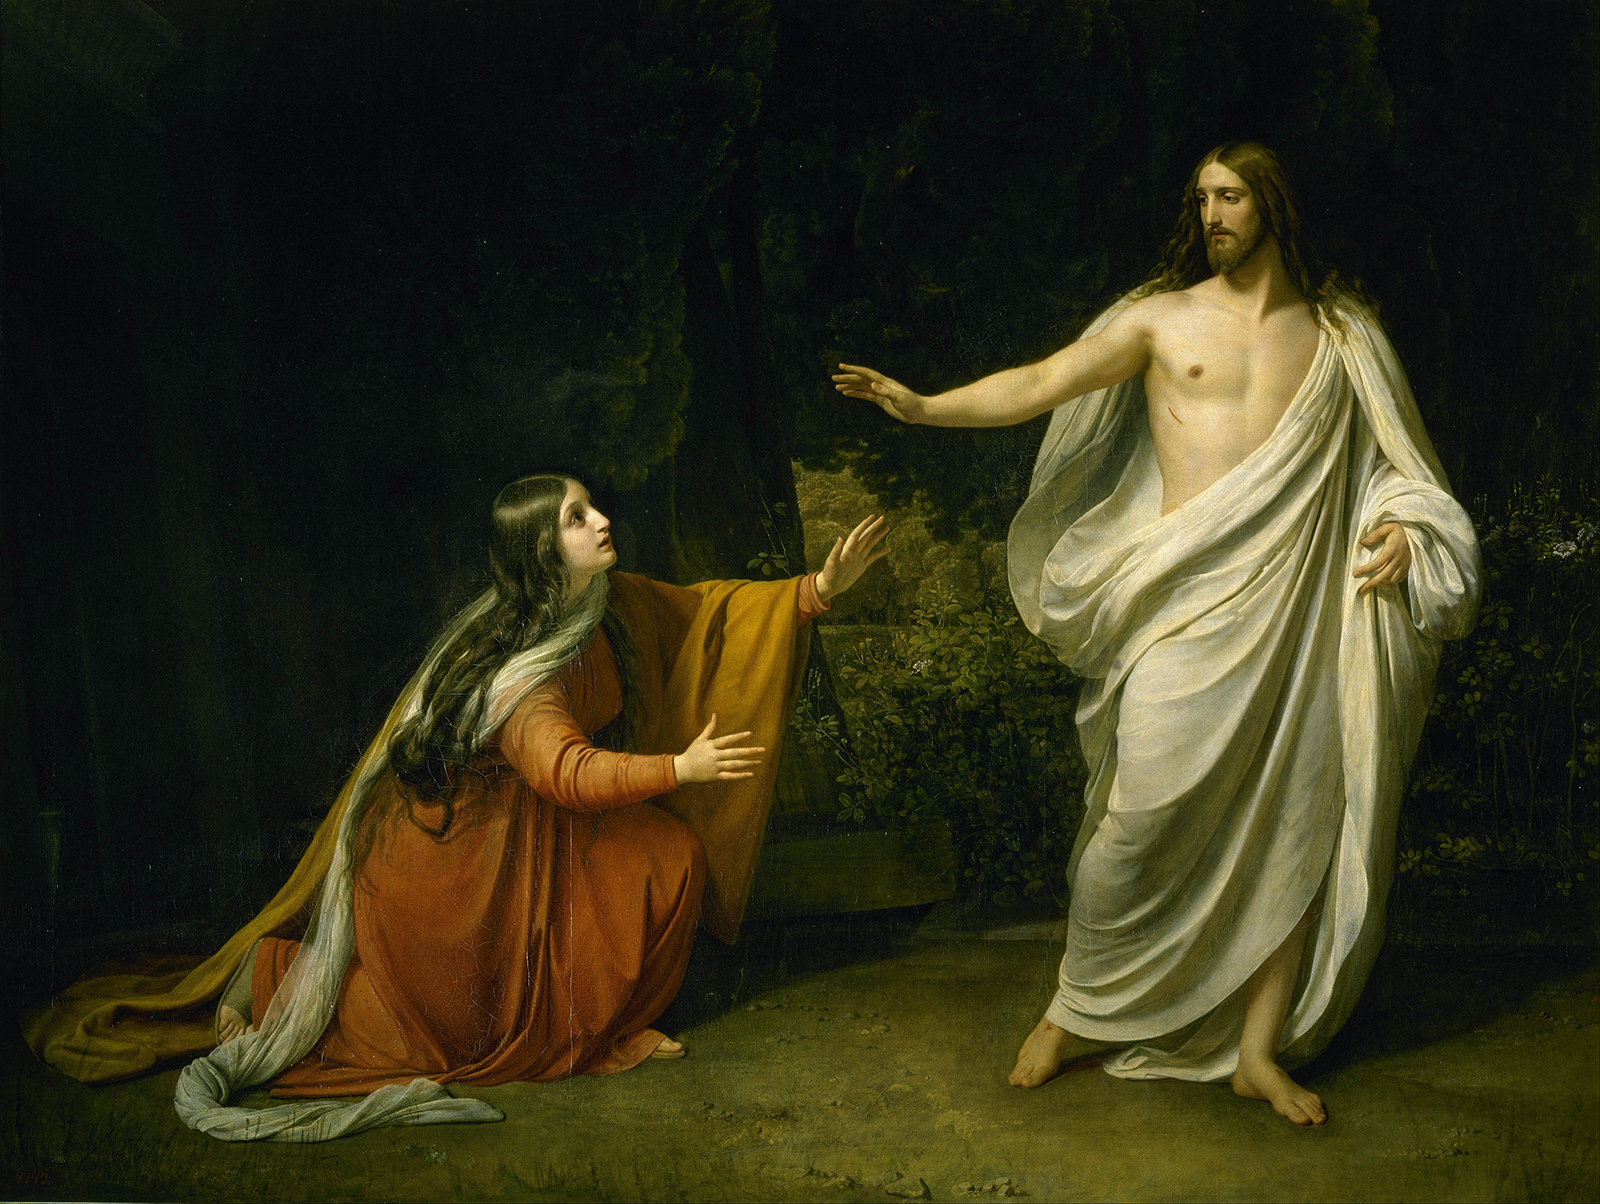 Artist Alexander Ivanov’s 1835 painting "Christ's Appearance to Mary Magdalene after the Resurrection”. Image courtesy of Creative Commons